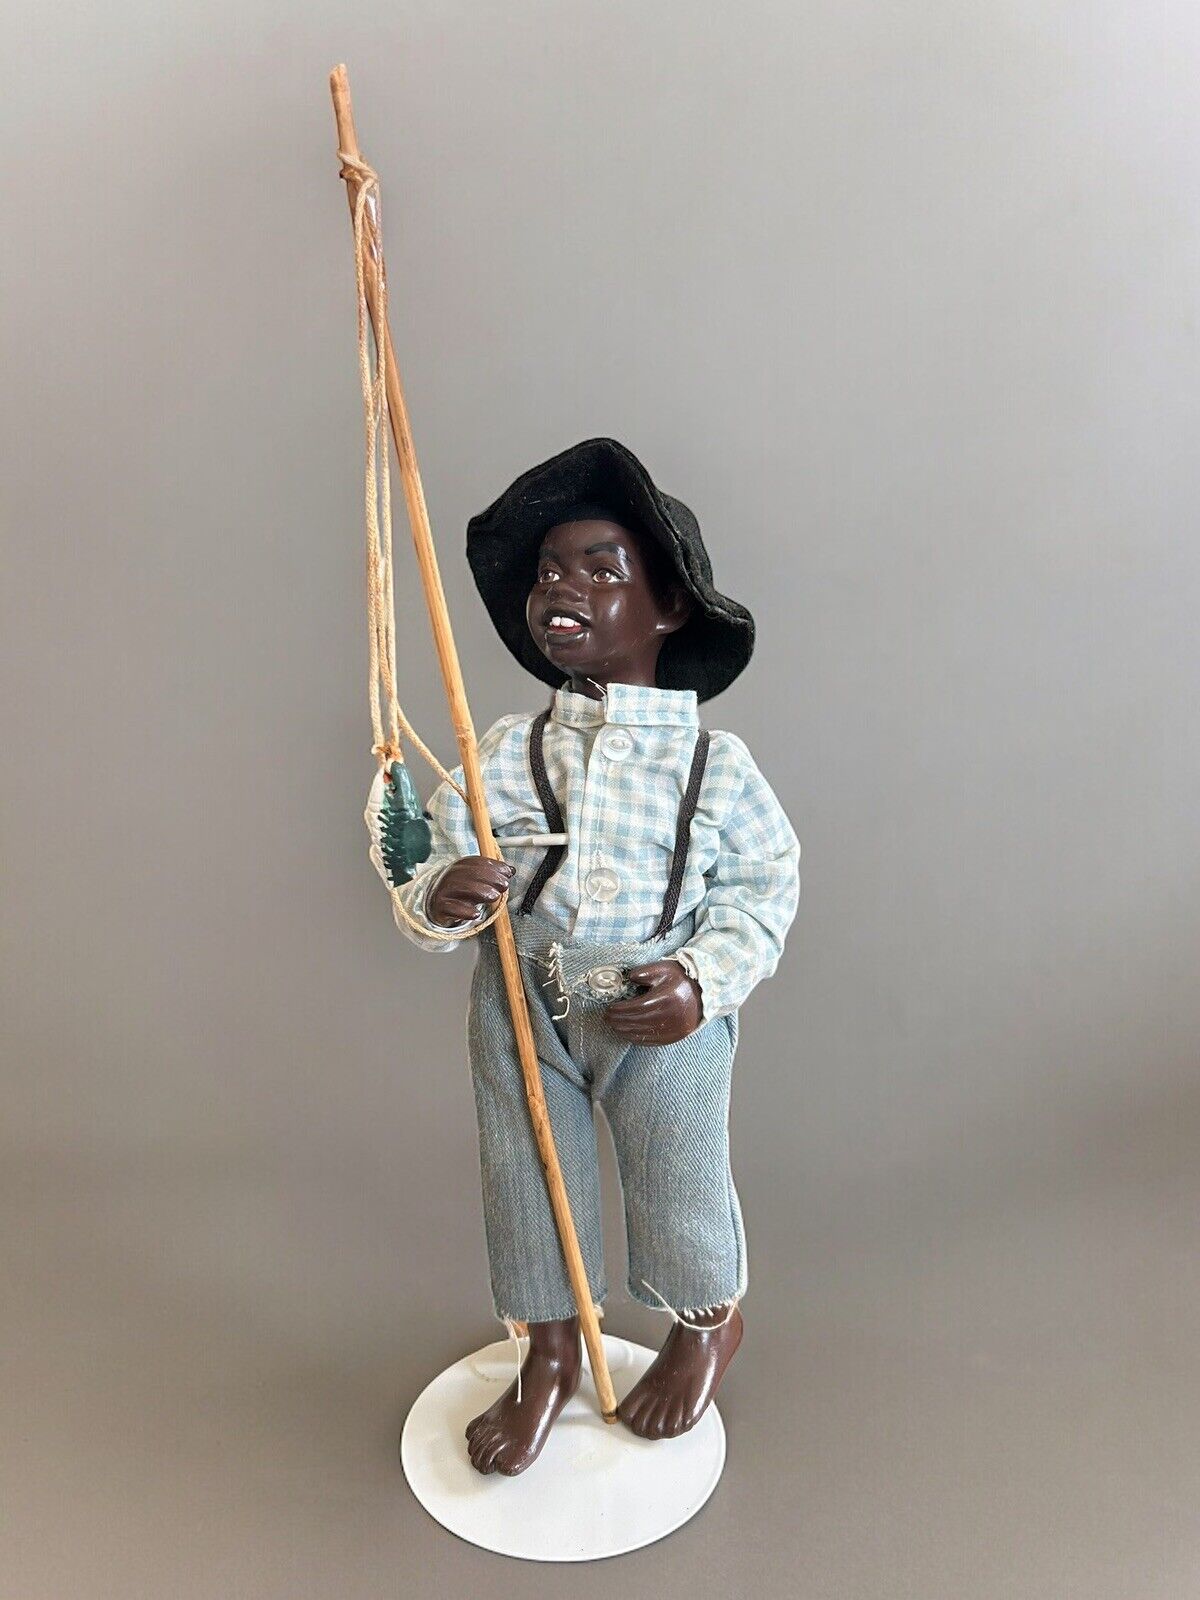 Vintage Ceramic Male Doll Figure Fishing Americana  Jointed Handcrafted Folk Art